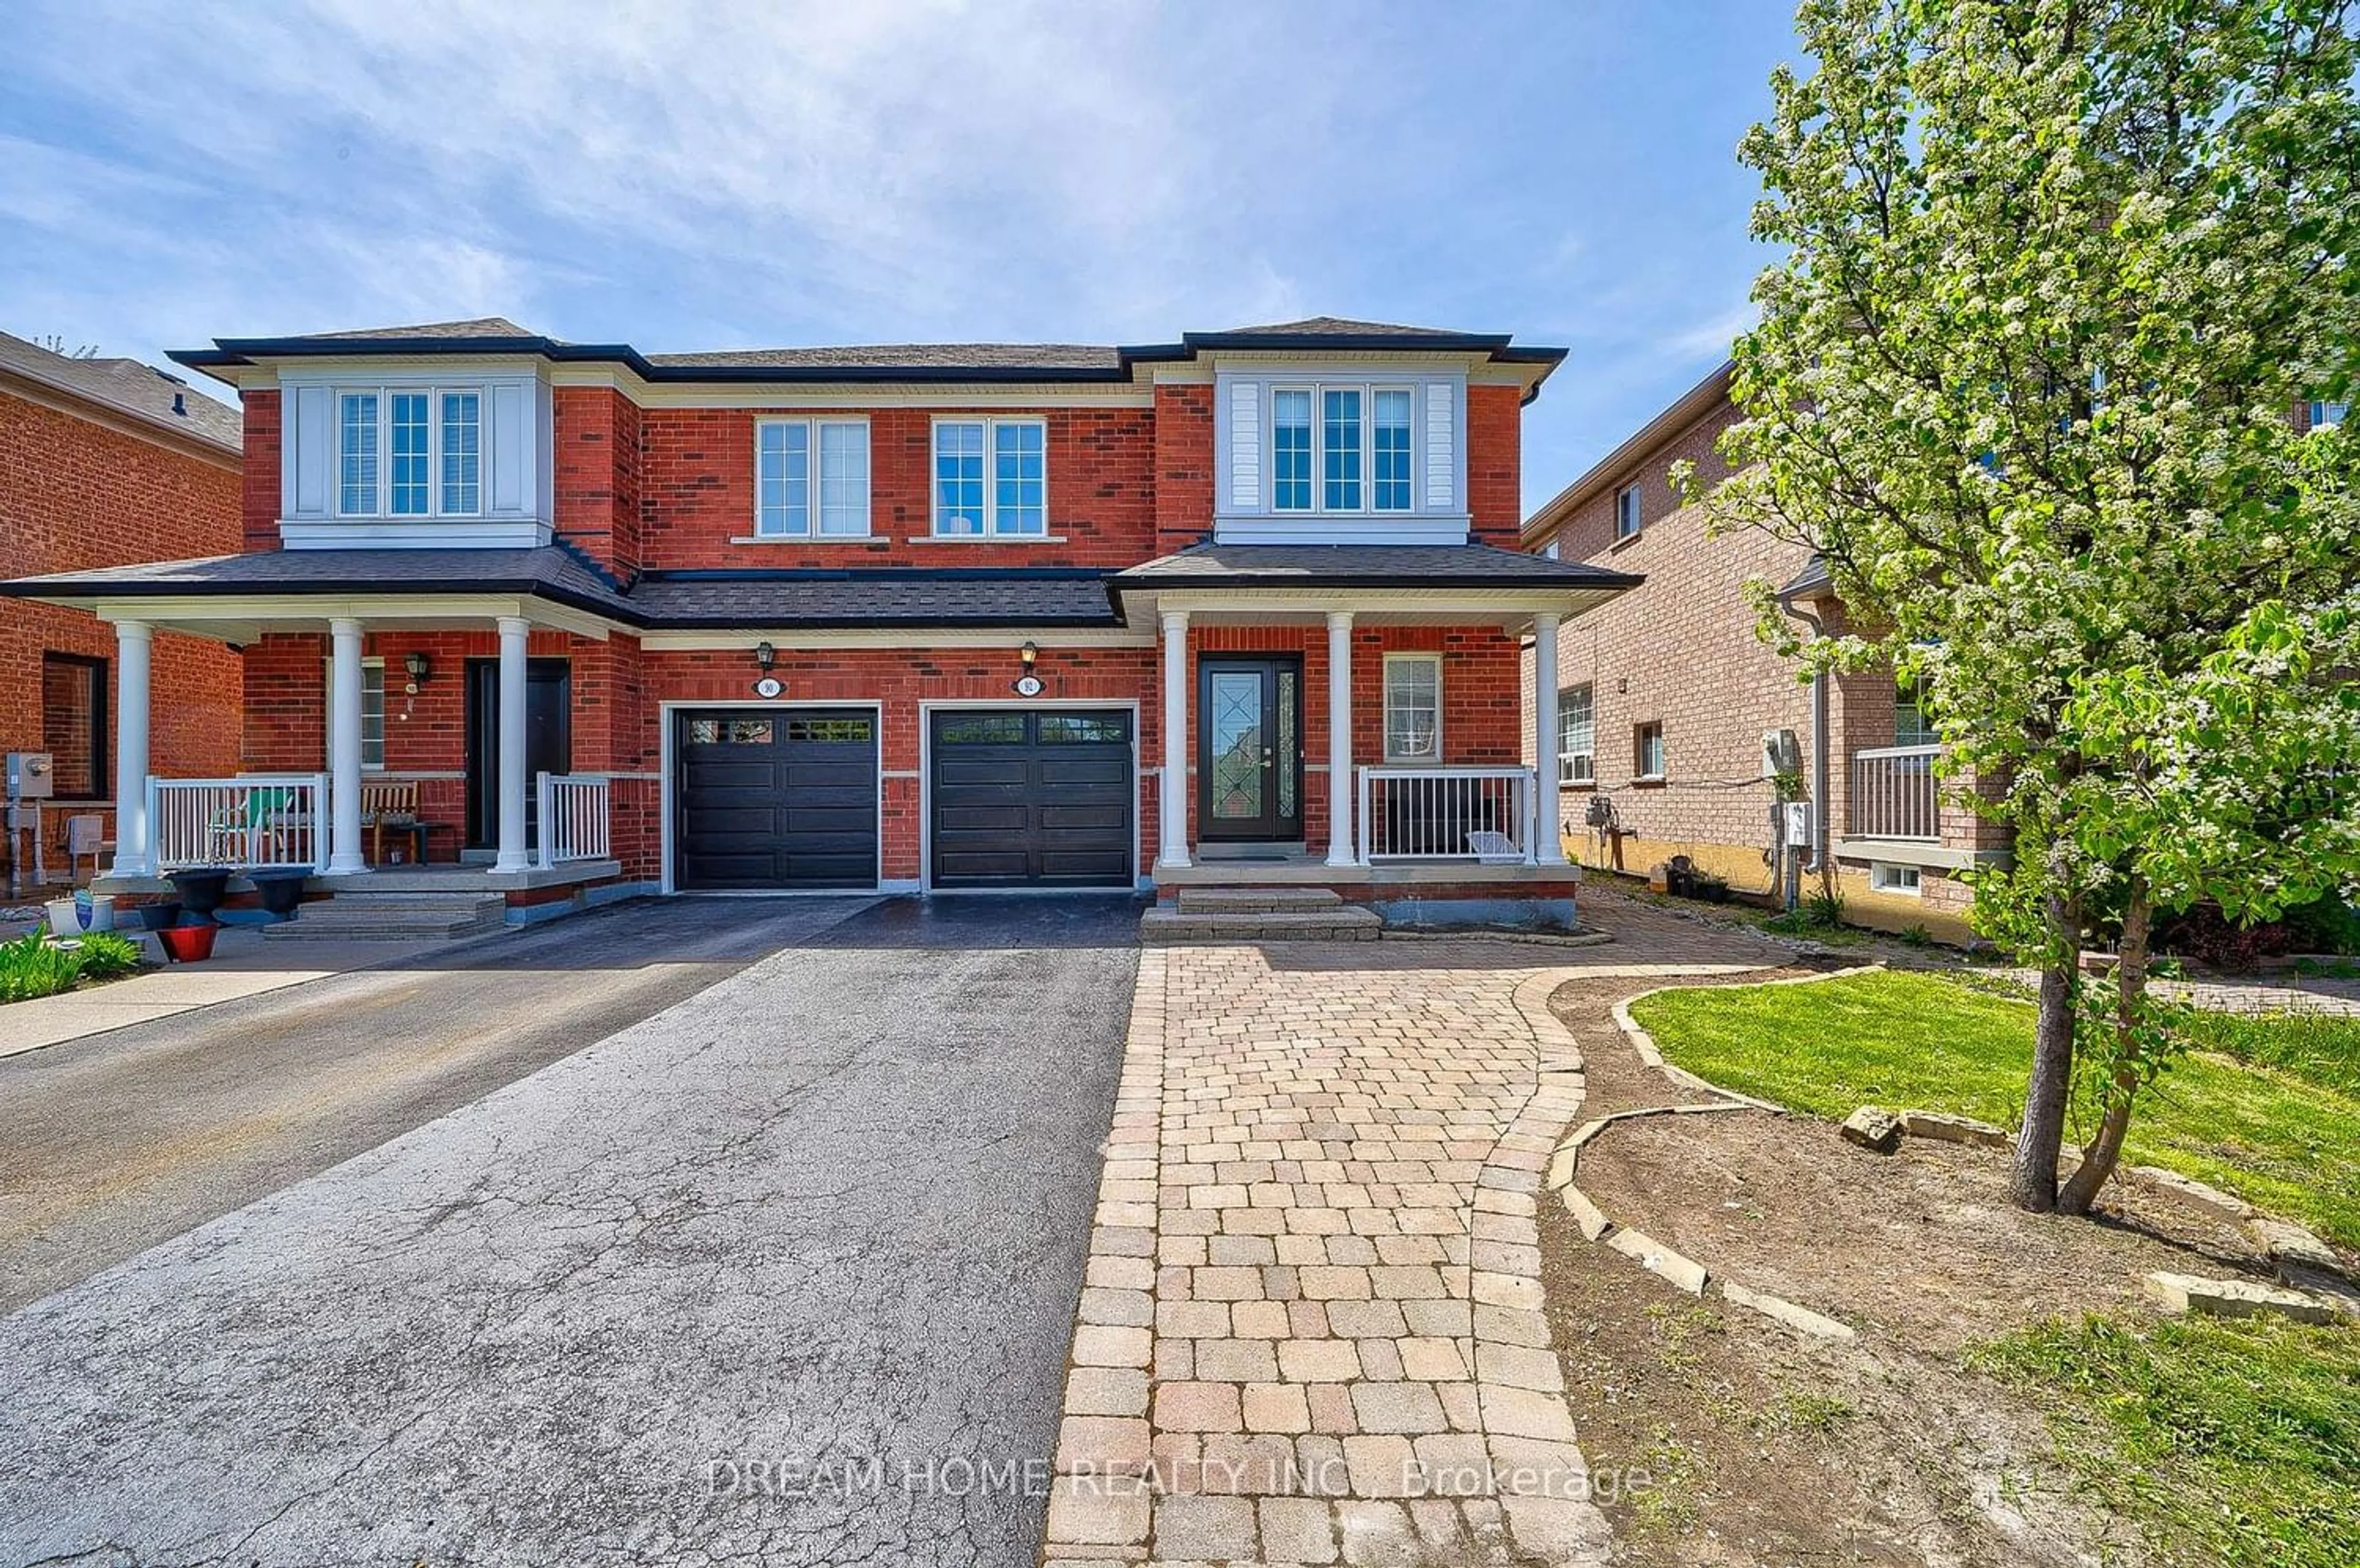 Home with brick exterior material for 92 Bologna Rd, Vaughan Ontario L4H 2B7